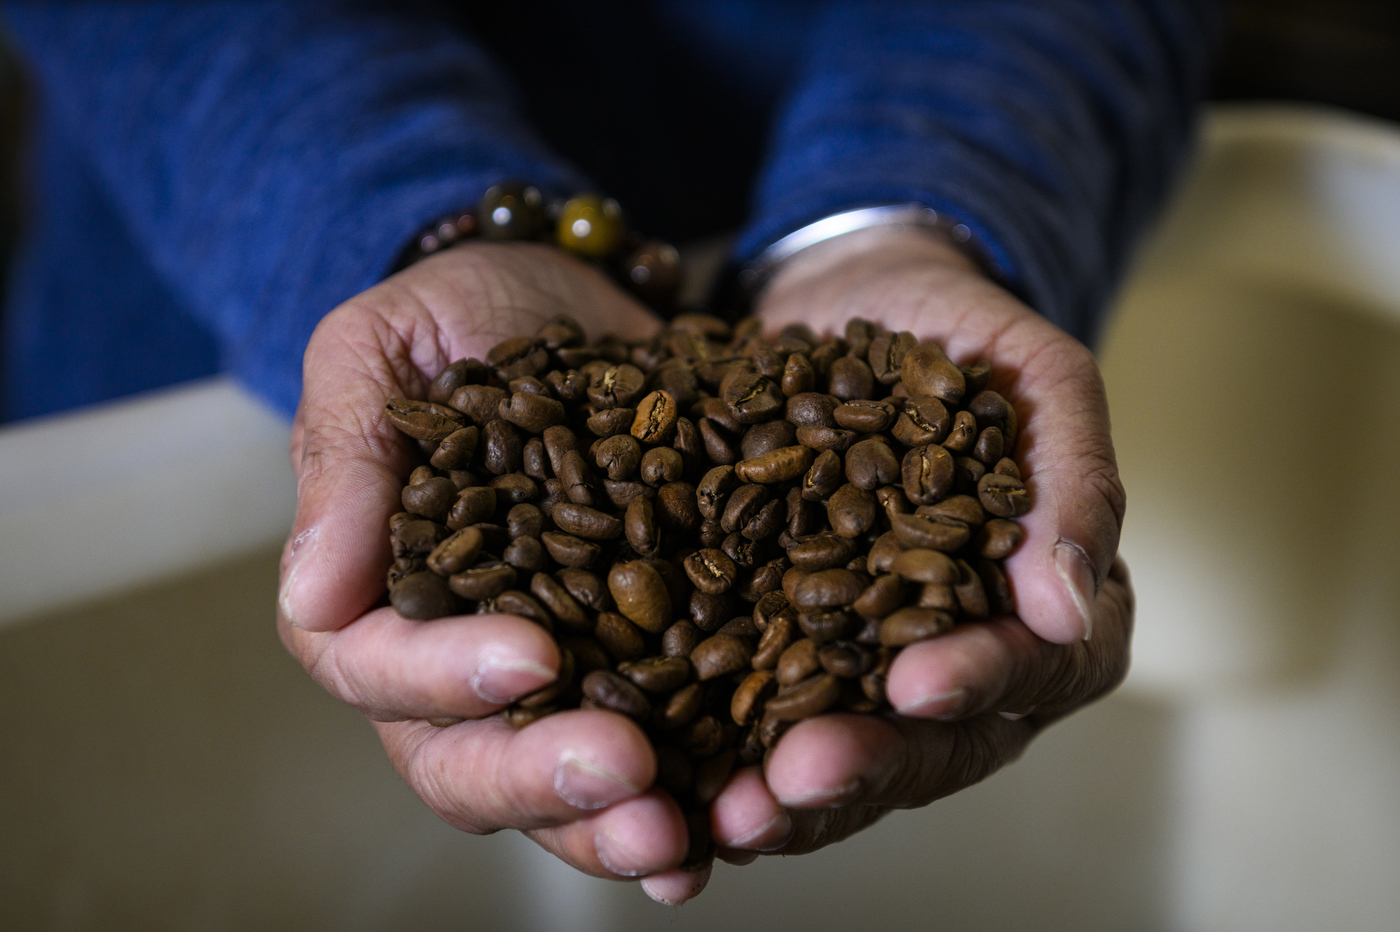 Hands hold a small pile of roasted coffee beans. 